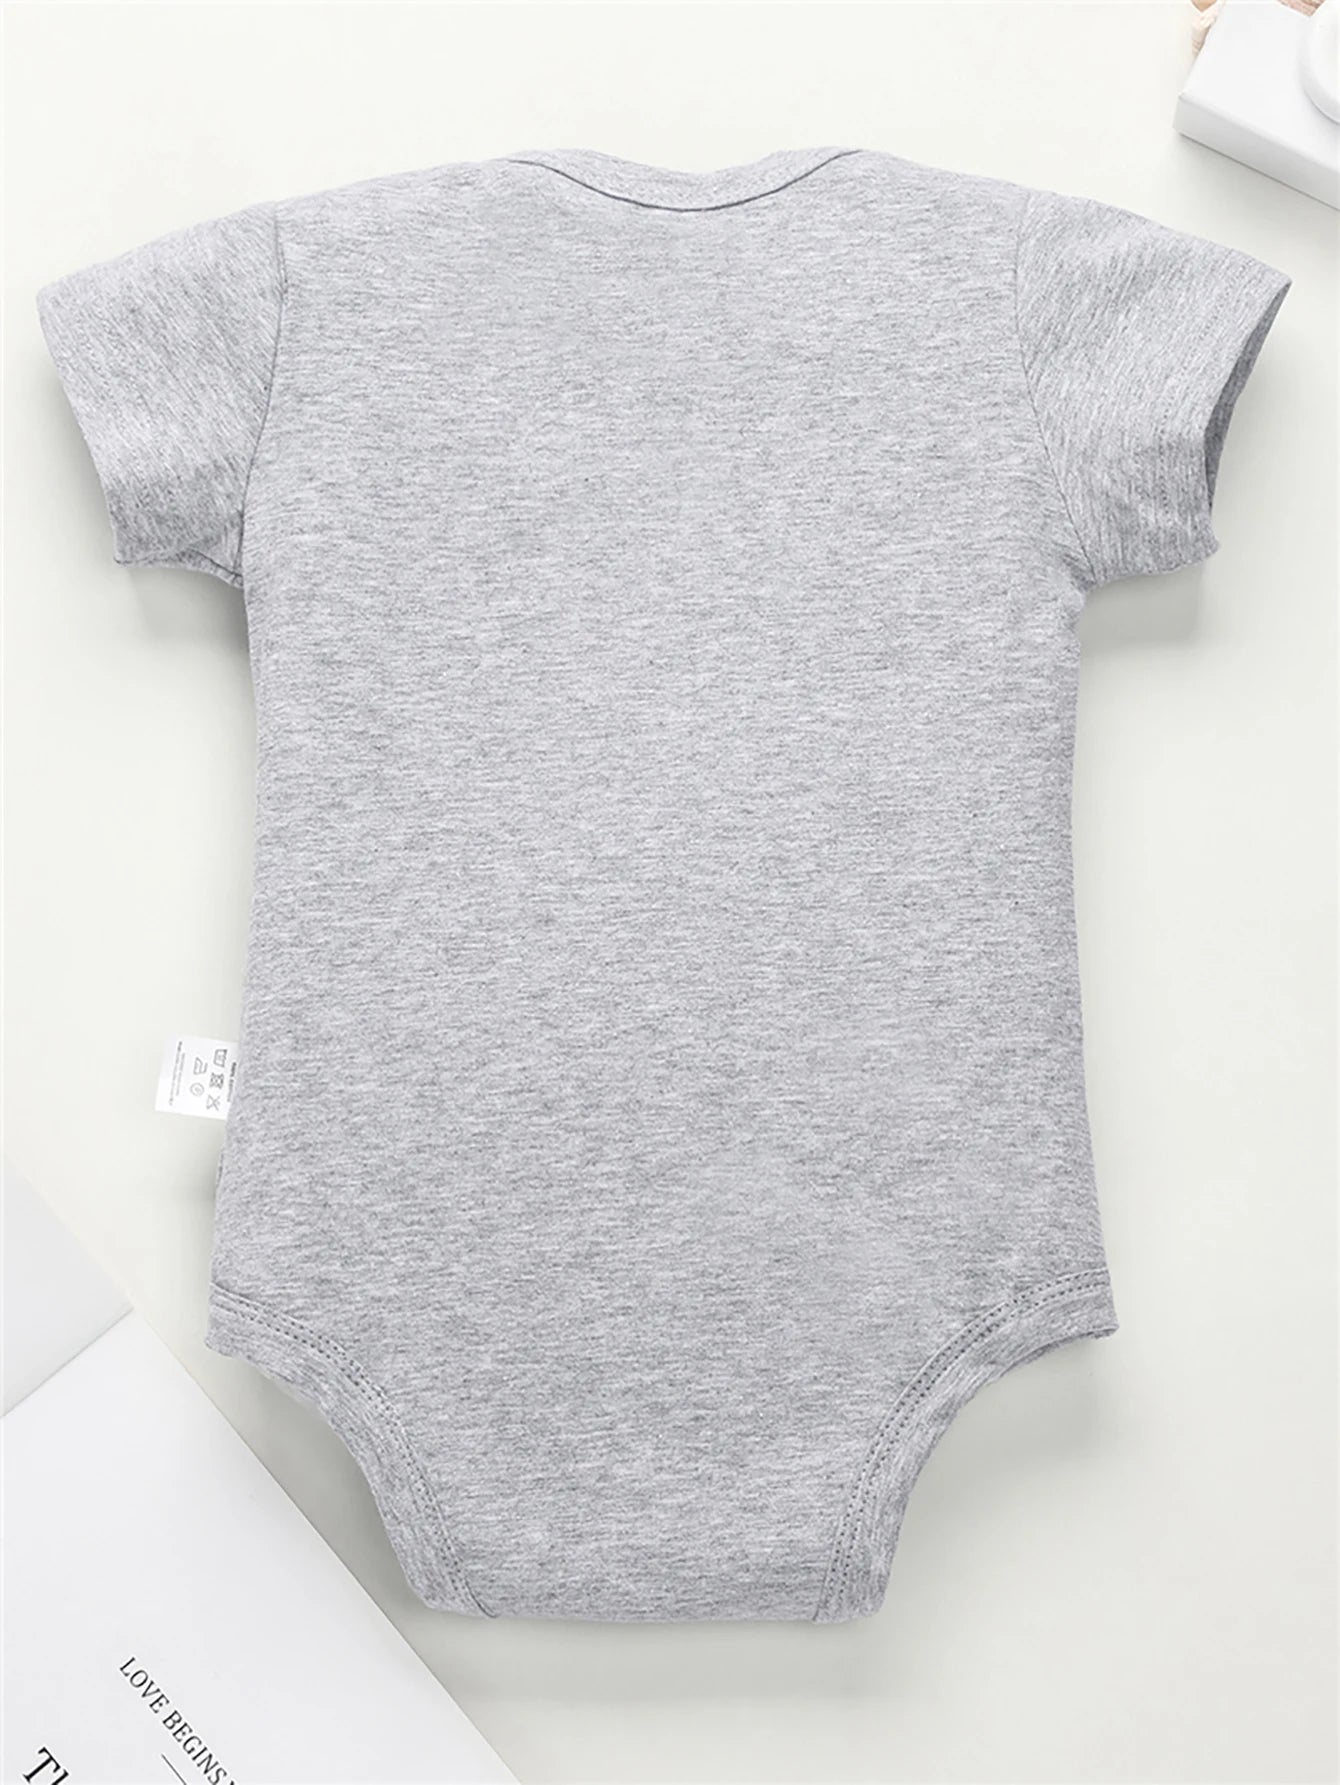 Summer Baby Onesie Funny Text Print Cute Newborn Boy Girl Clothes Pajamas Cotton Short Sleeve Crew Neck Home Toddler Romper